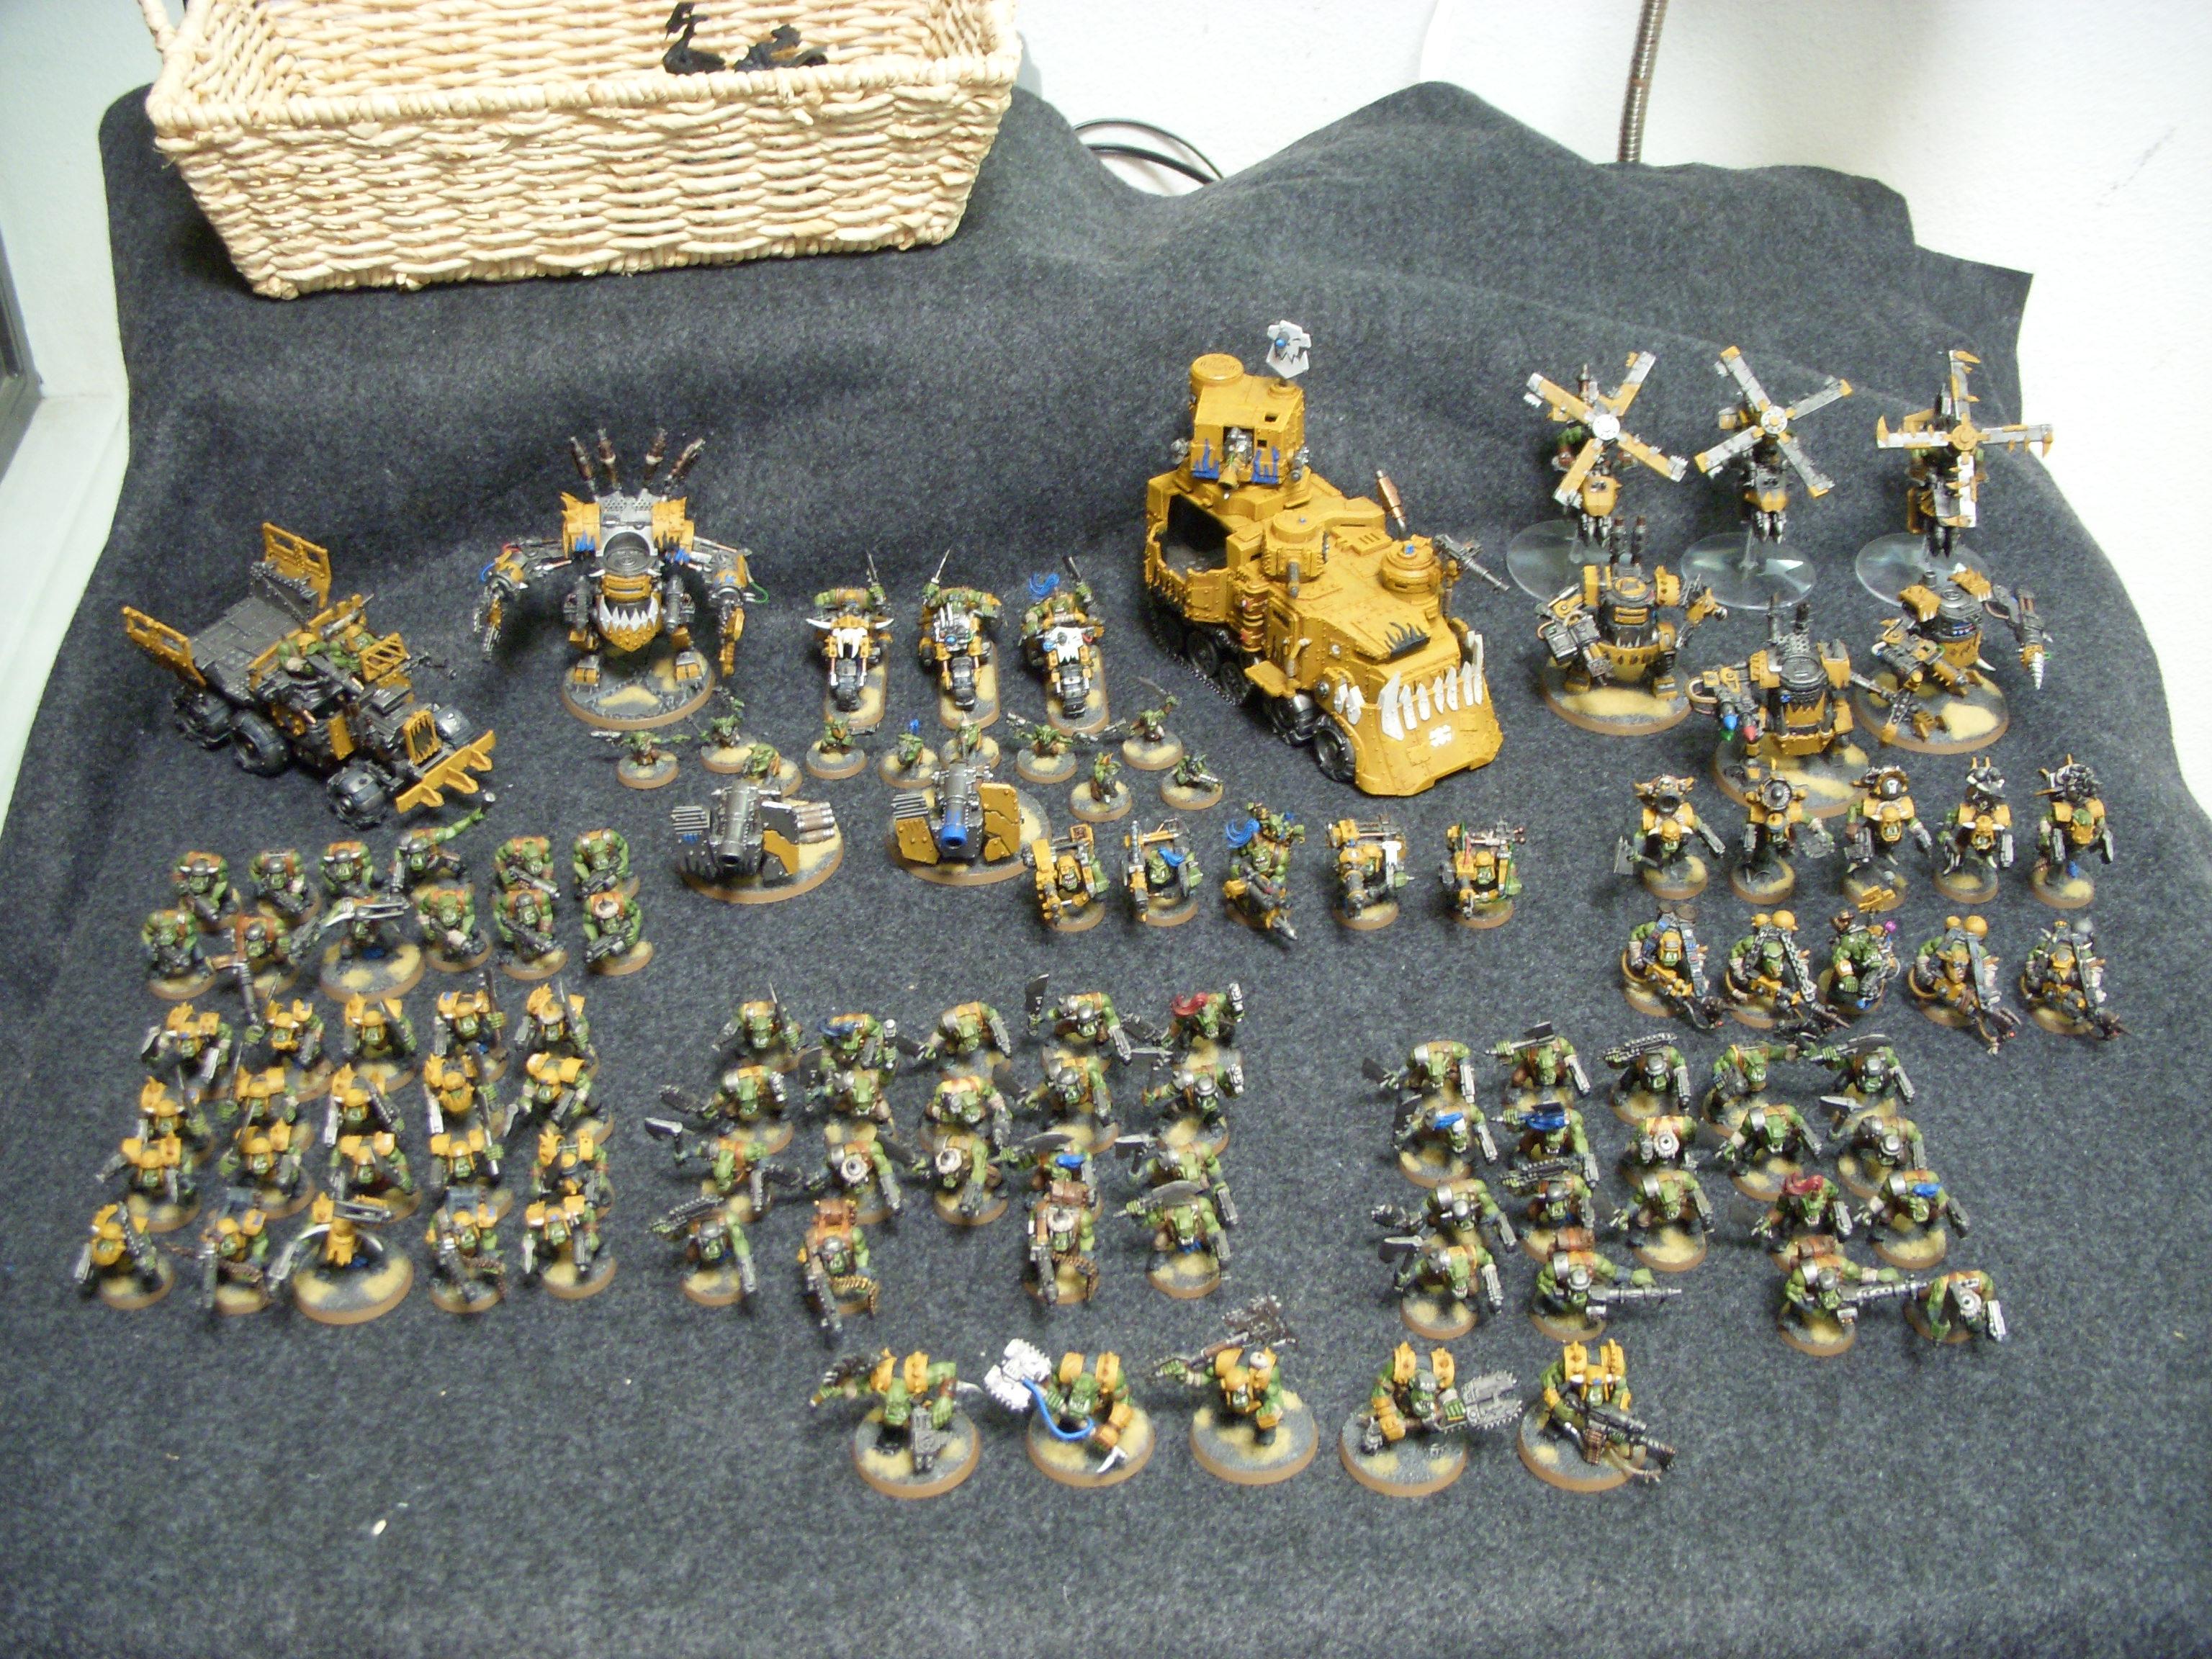 Army, Bad Moon Orks, Bad Moons, Imperial Guard Mordian Iron Guard Bad Moon Orks, Mordian Imperial Guard, Orks